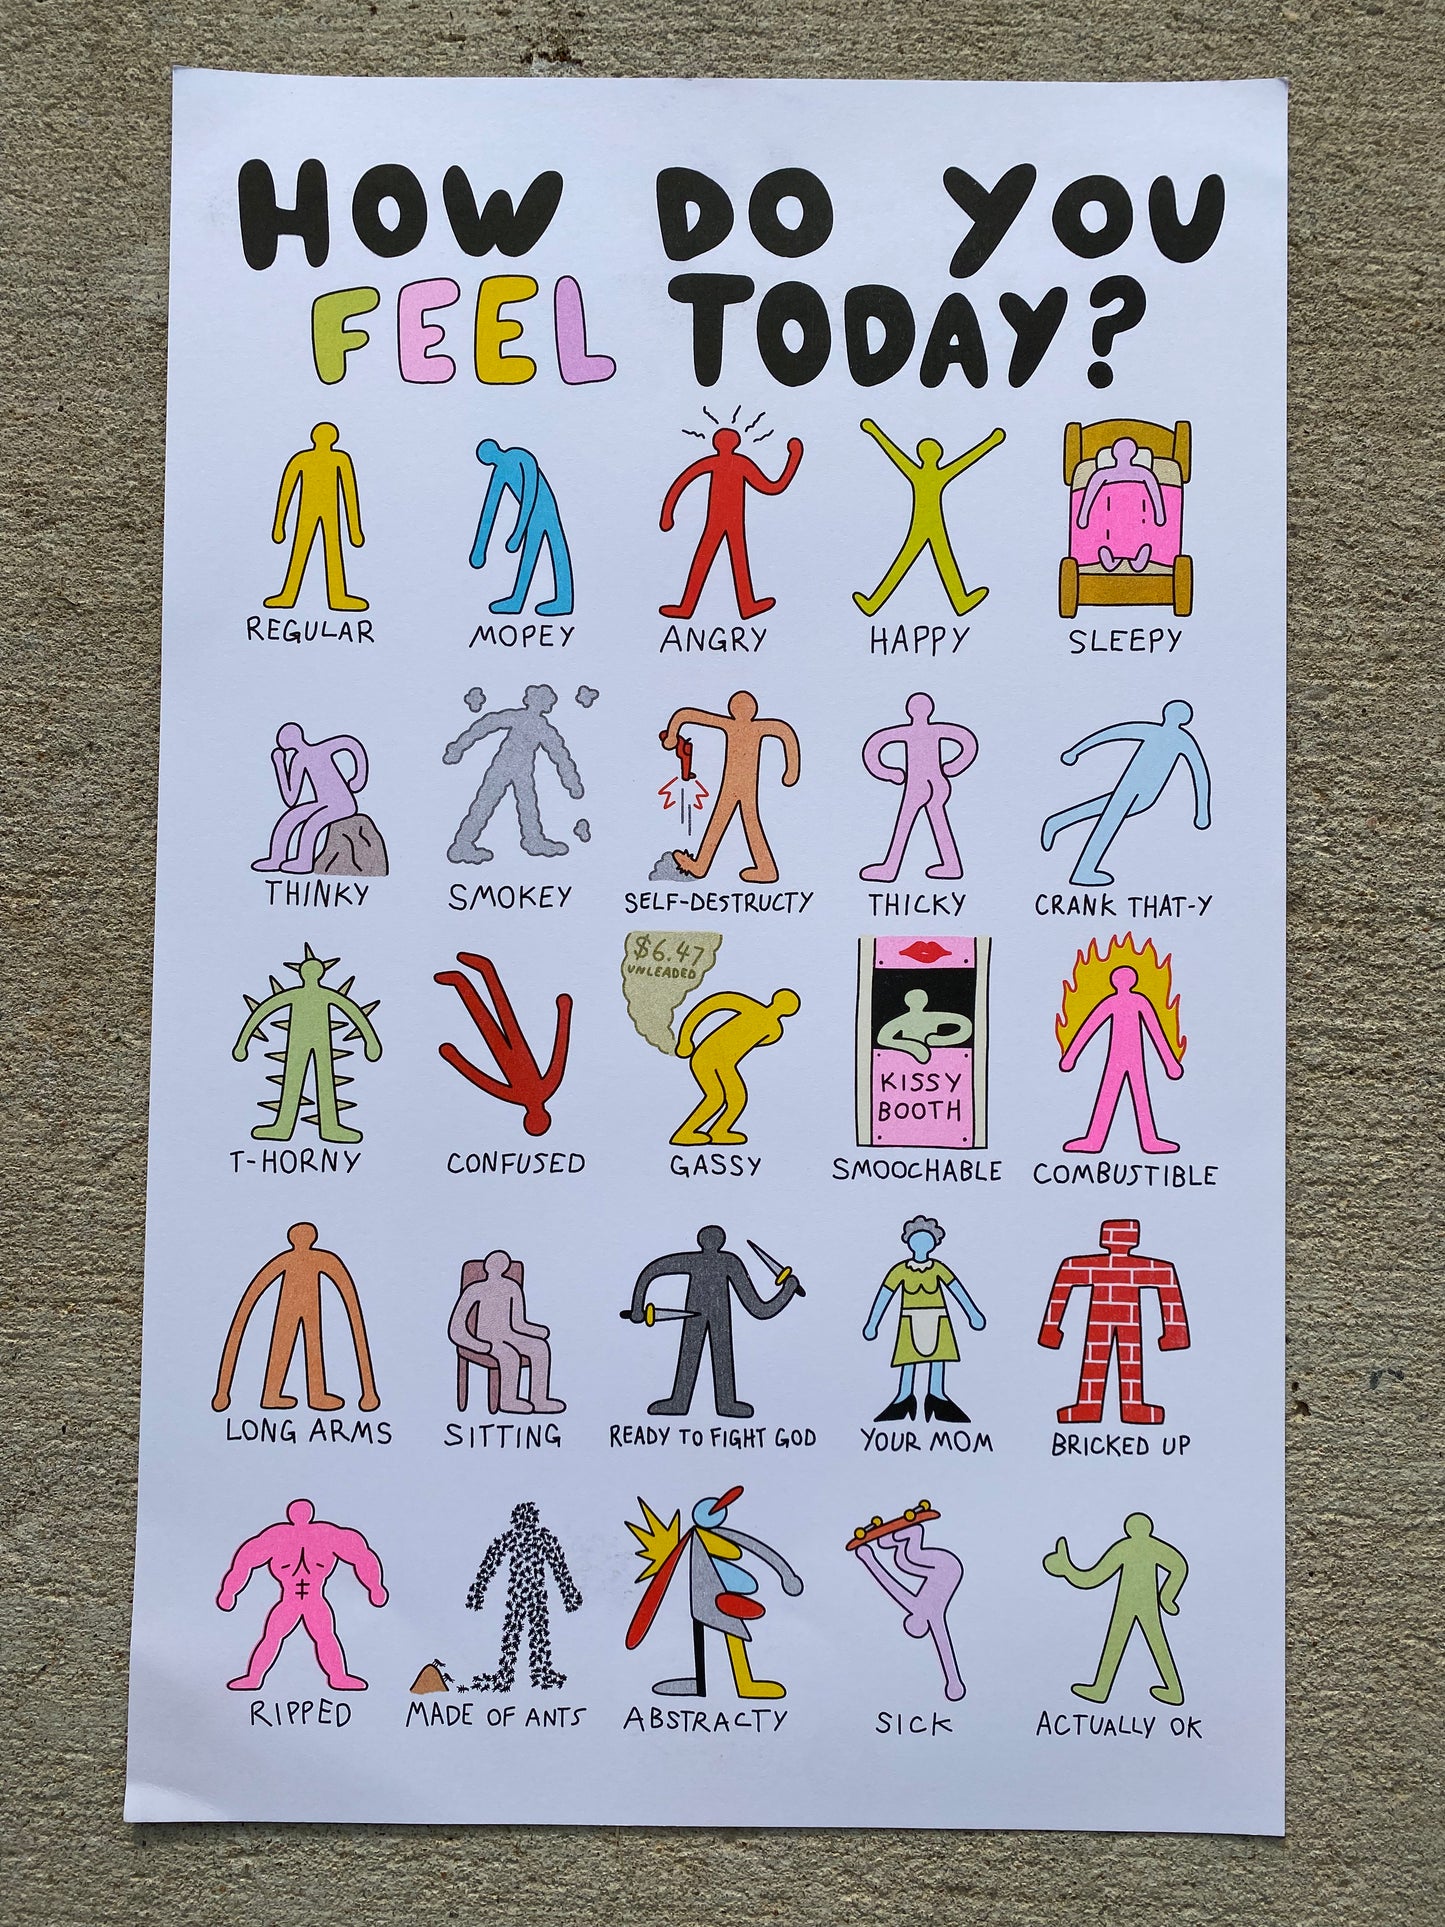 A white poster that reads How Do You Feel Today? at the top in black puffy font. Below that there are 5 rows of 5 different figures, each with a word below them. The top row of figures have Regular, Mopey, Angry, Happy & Sleepy below them.